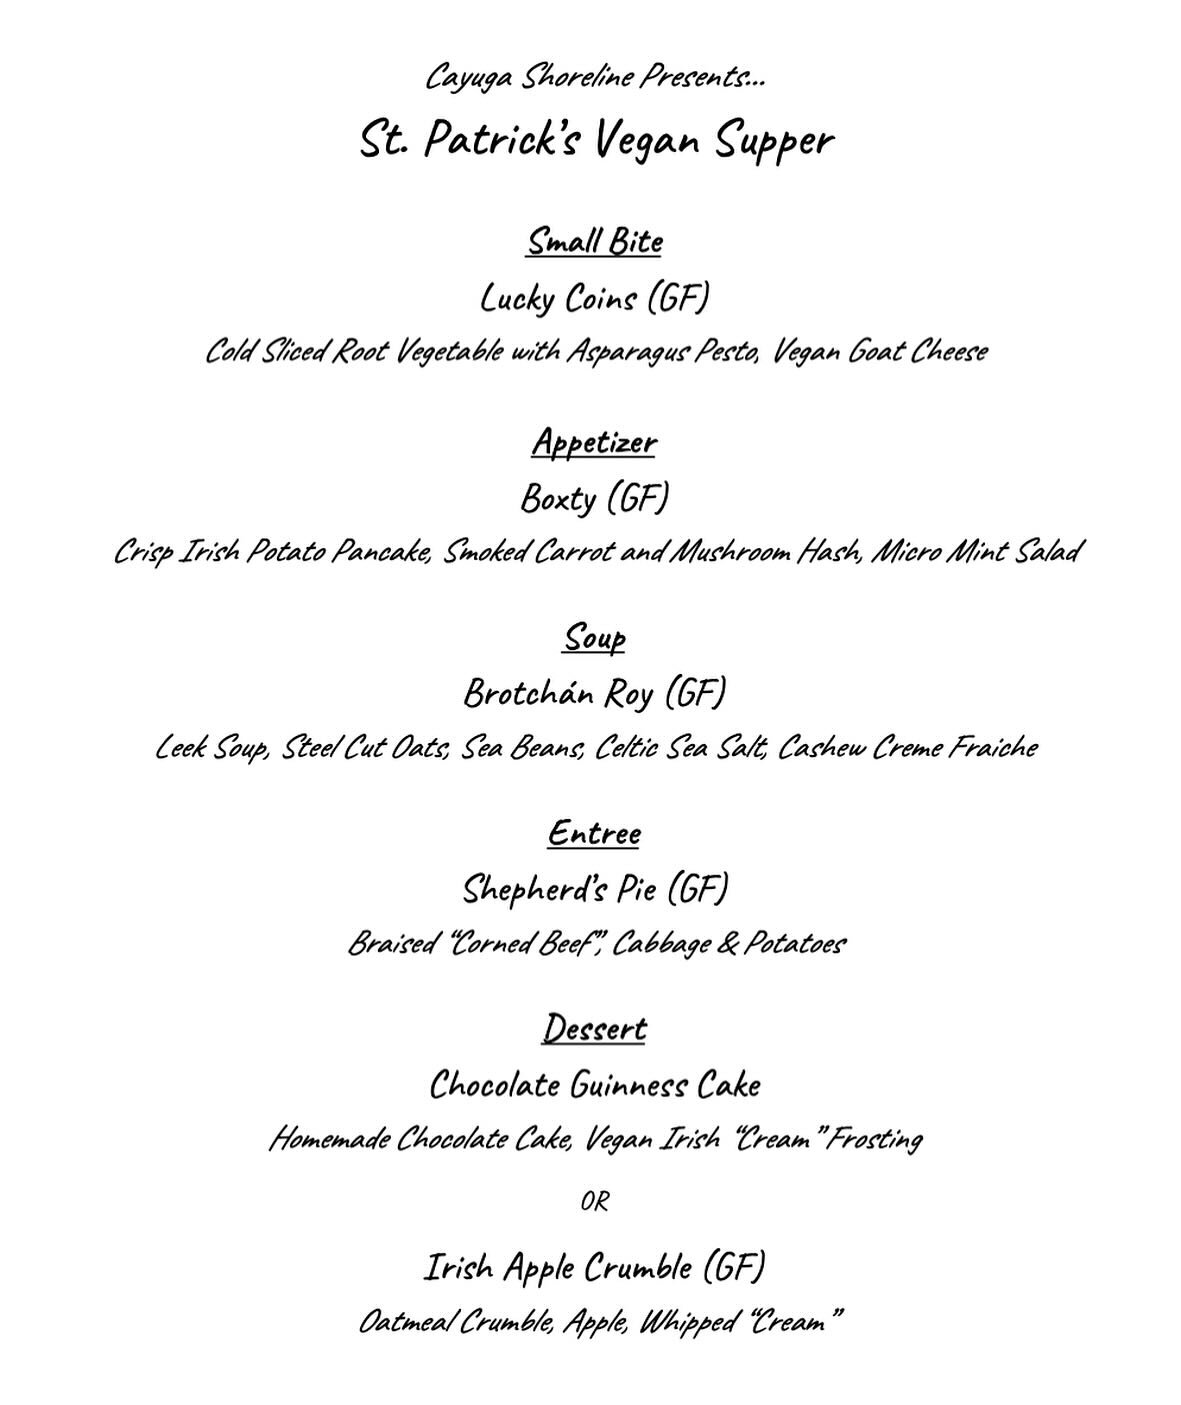 Check out the menu for our St. Patrick&rsquo;s Day Vegan Supper on Friday, March 15th! Tickets are $45 per person. You can email events@cayugashoreline.com to make your reservation or purchase advance tickets at the link in our bio. ☘️

#vegandinner 